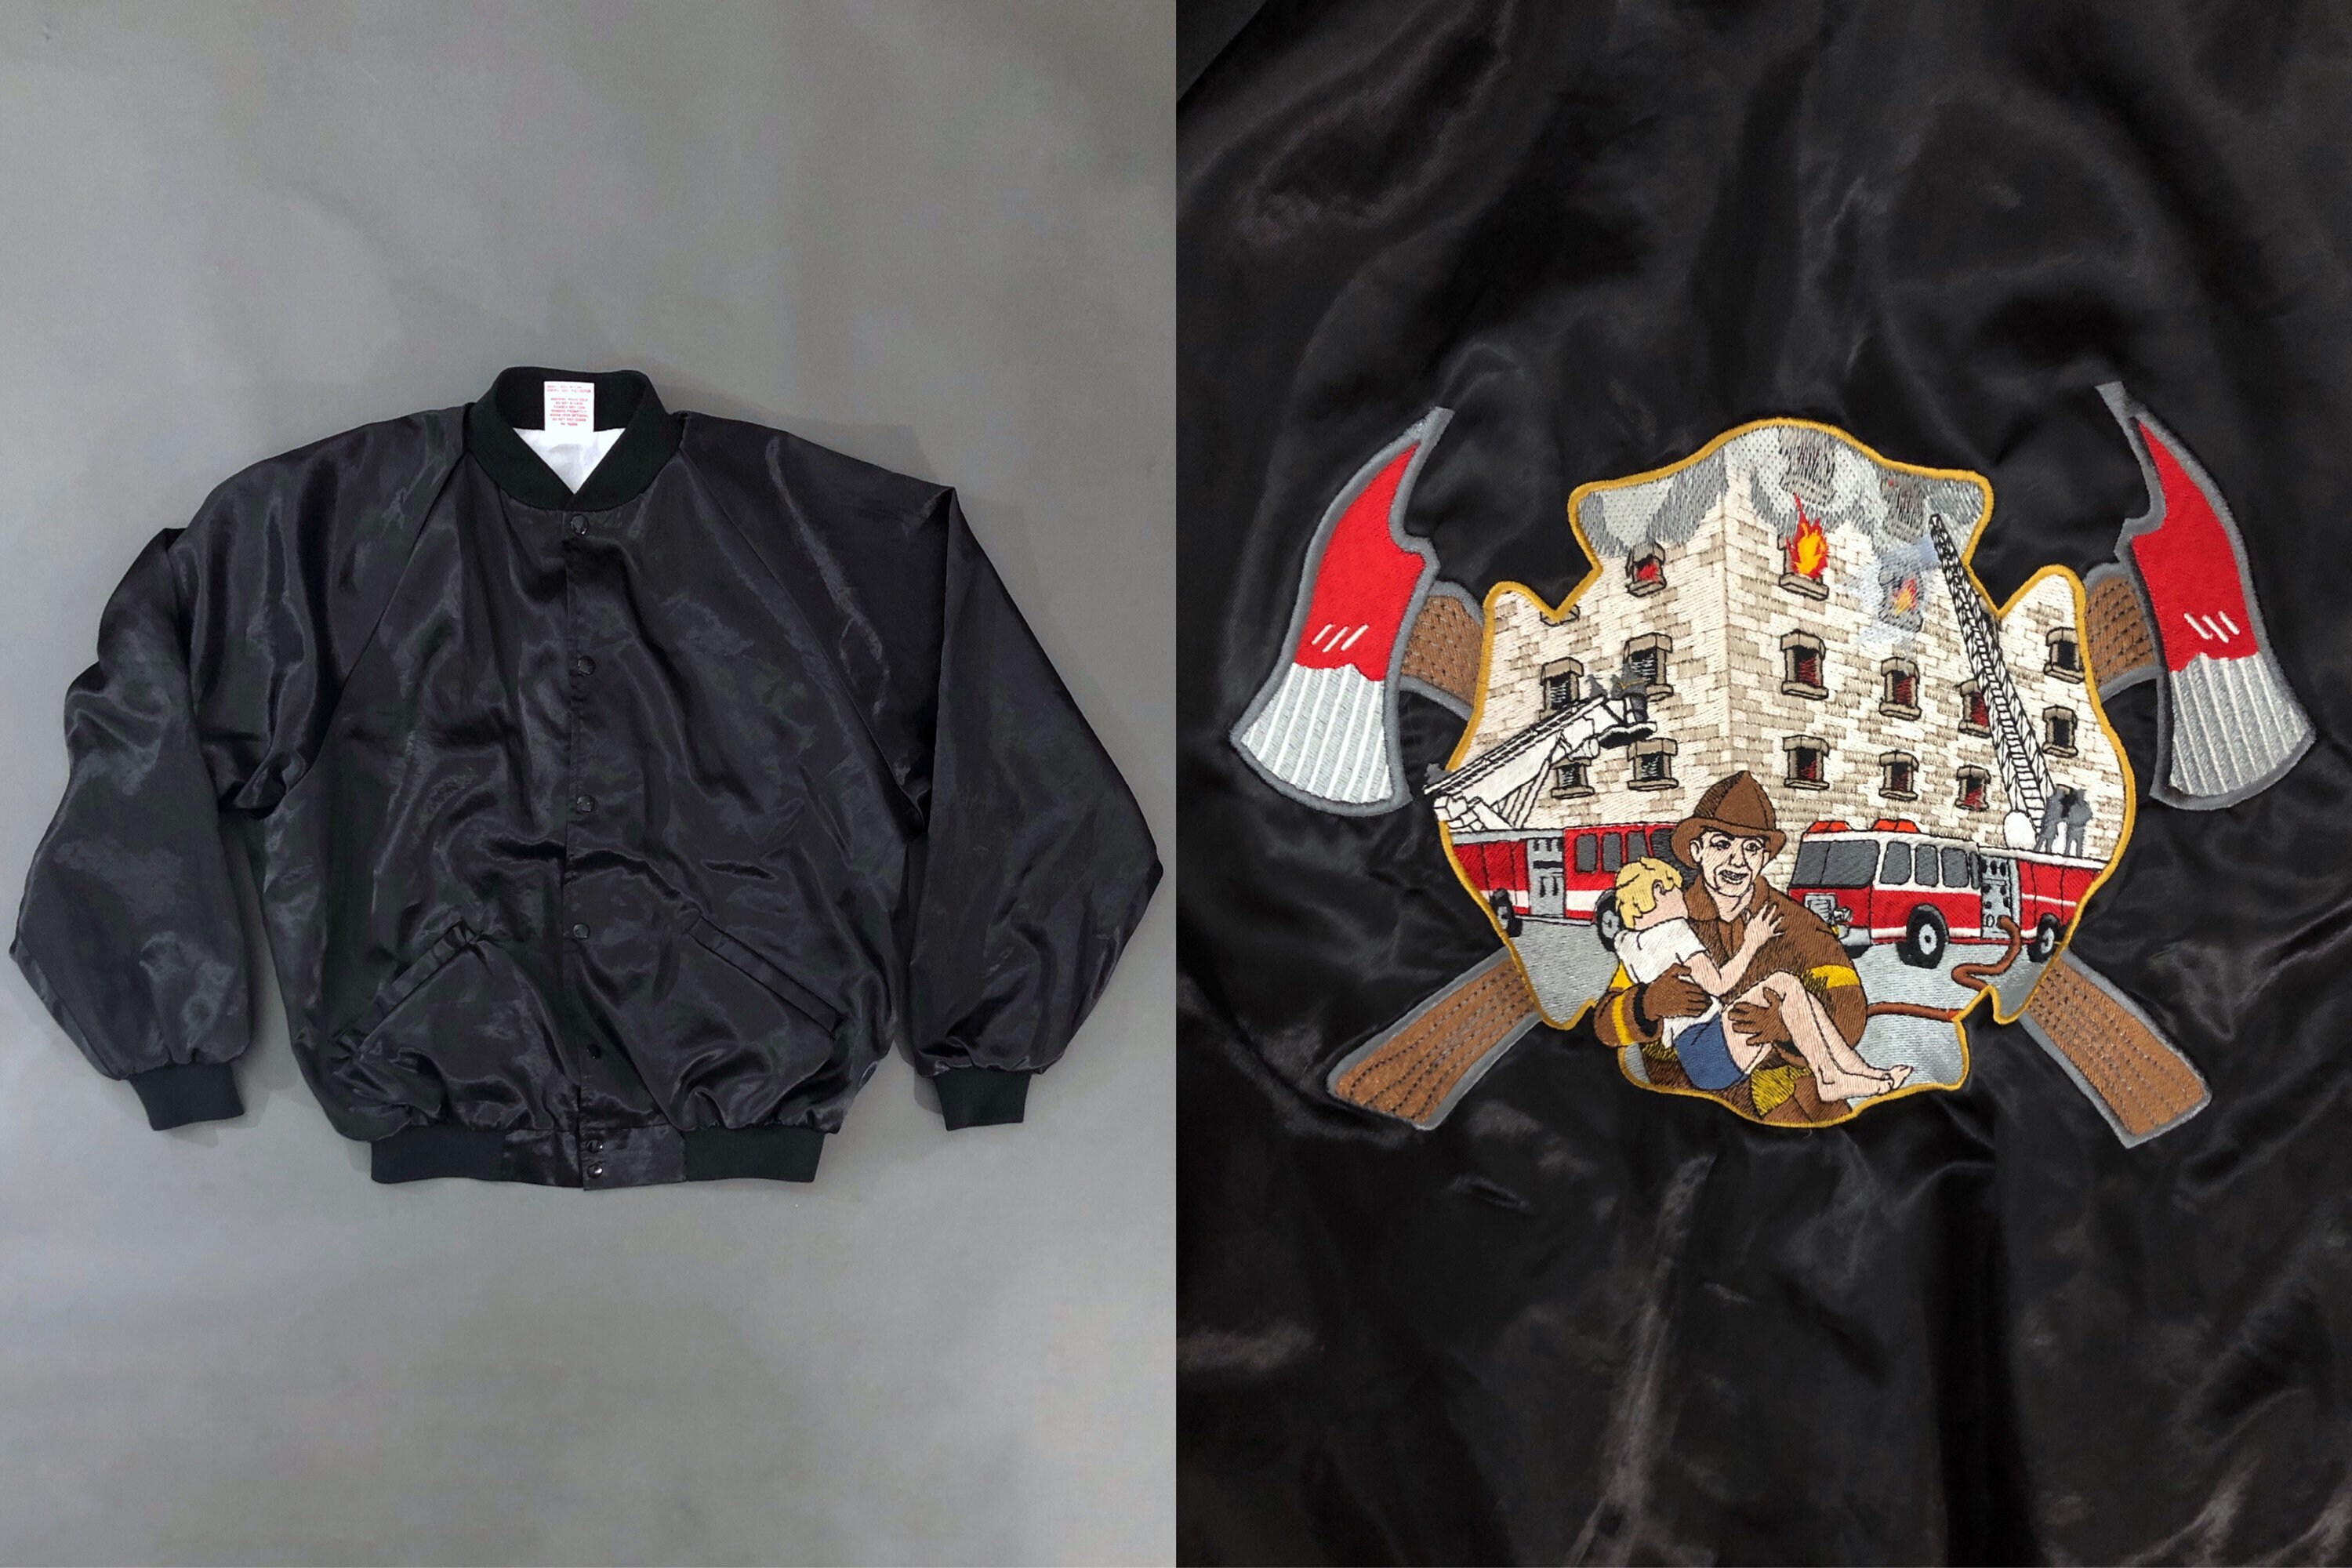 Bomber jacket with Pirates™ patch in blue and ivory